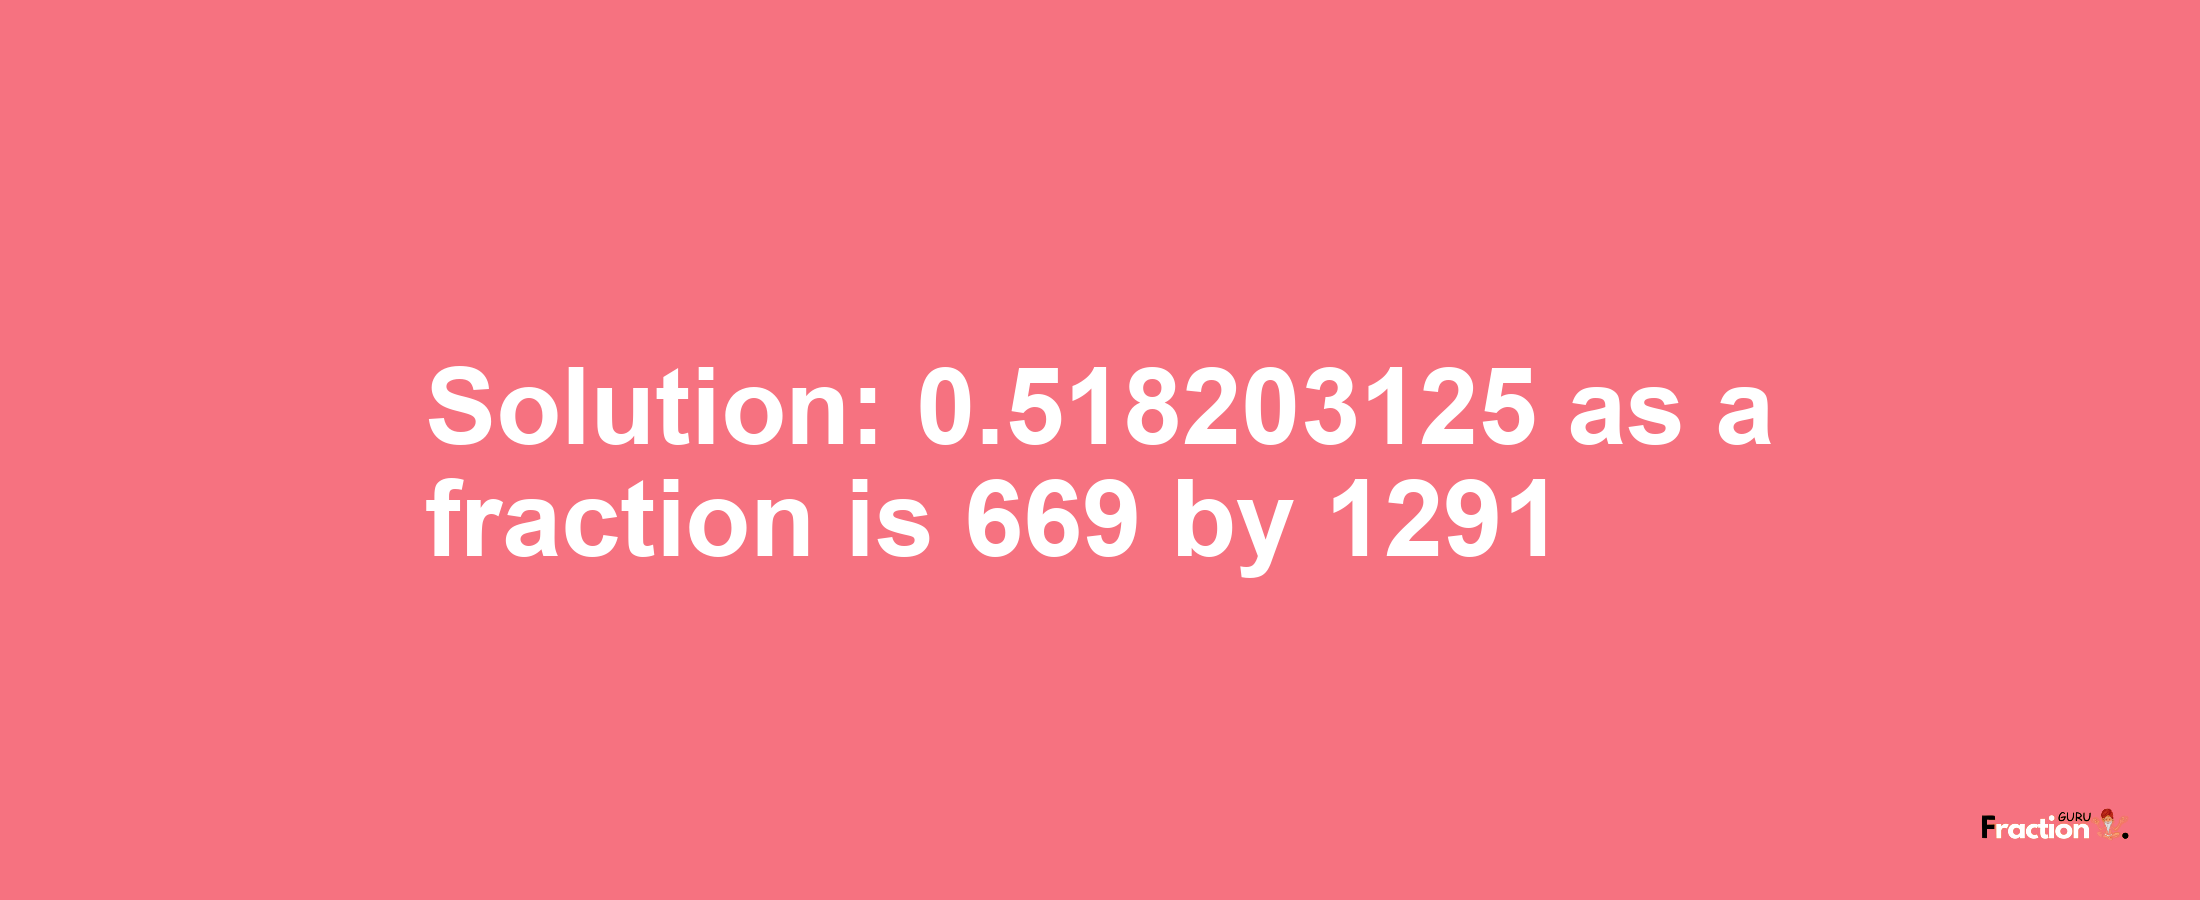 Solution:0.518203125 as a fraction is 669/1291